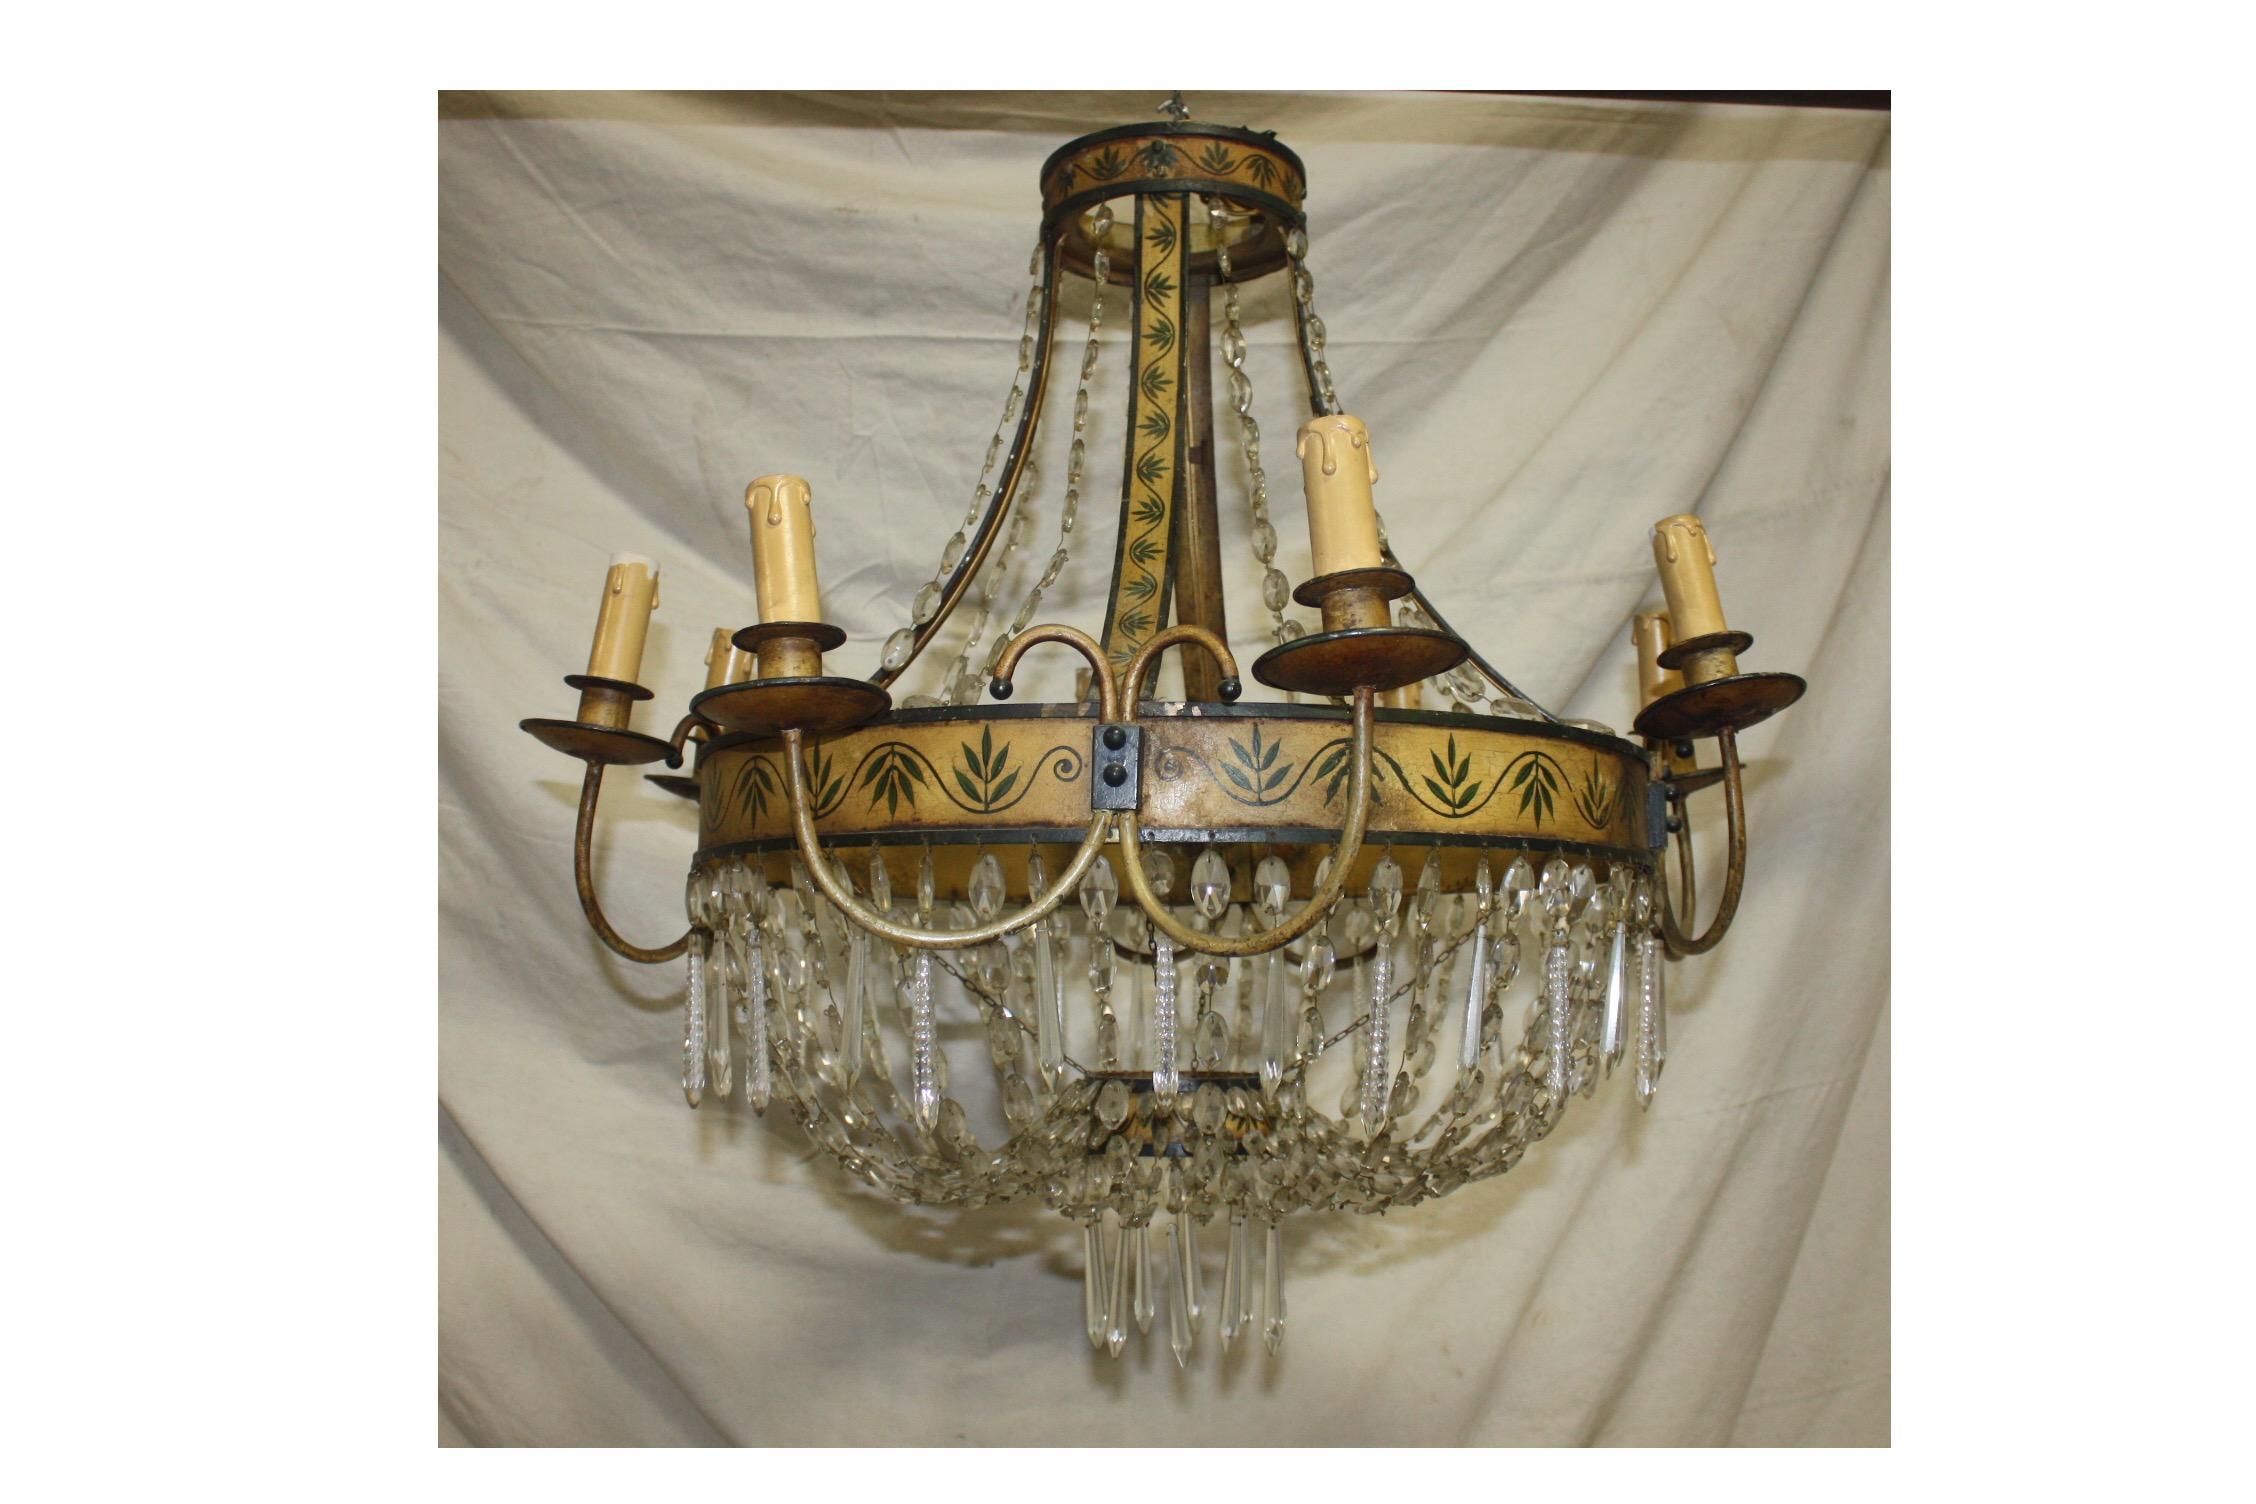 Sublime French Empire chandelier.